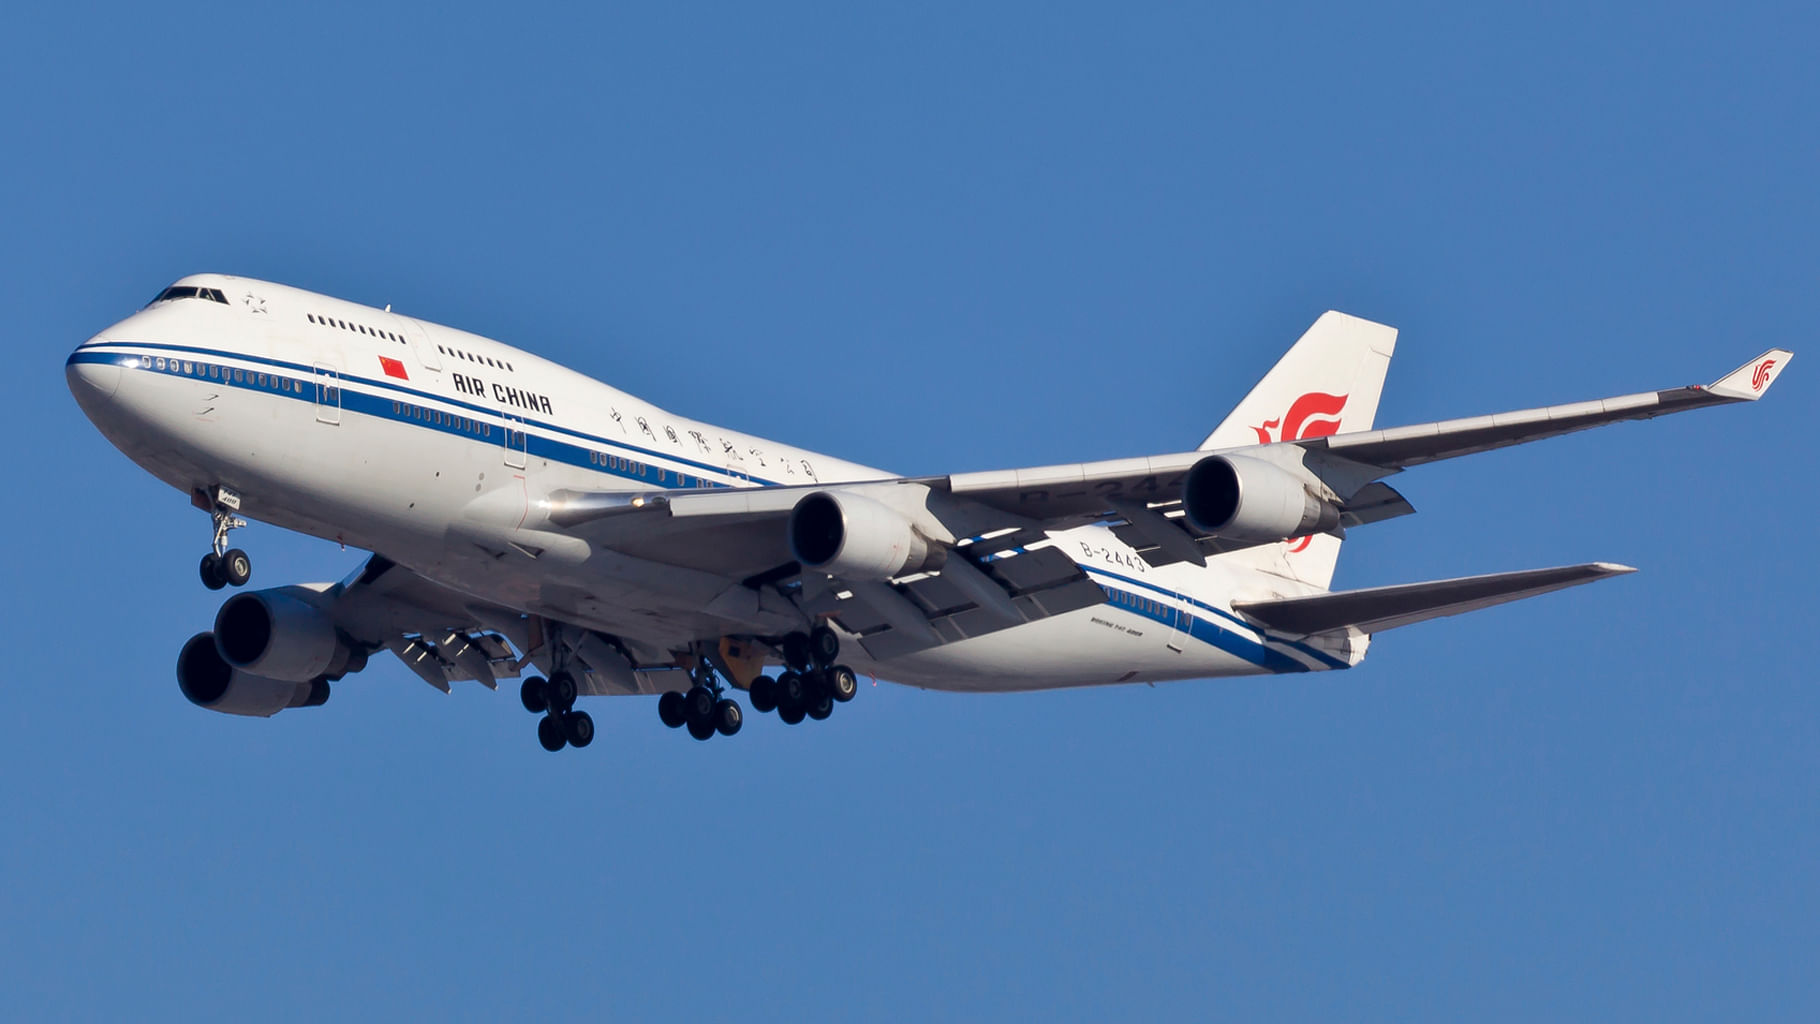 Haze Fan, a journalist working with CNBC posted a picture of the “Tips from Air China” section of the in-flight magazine. (Photo: For representational purposes. iStockphoto)